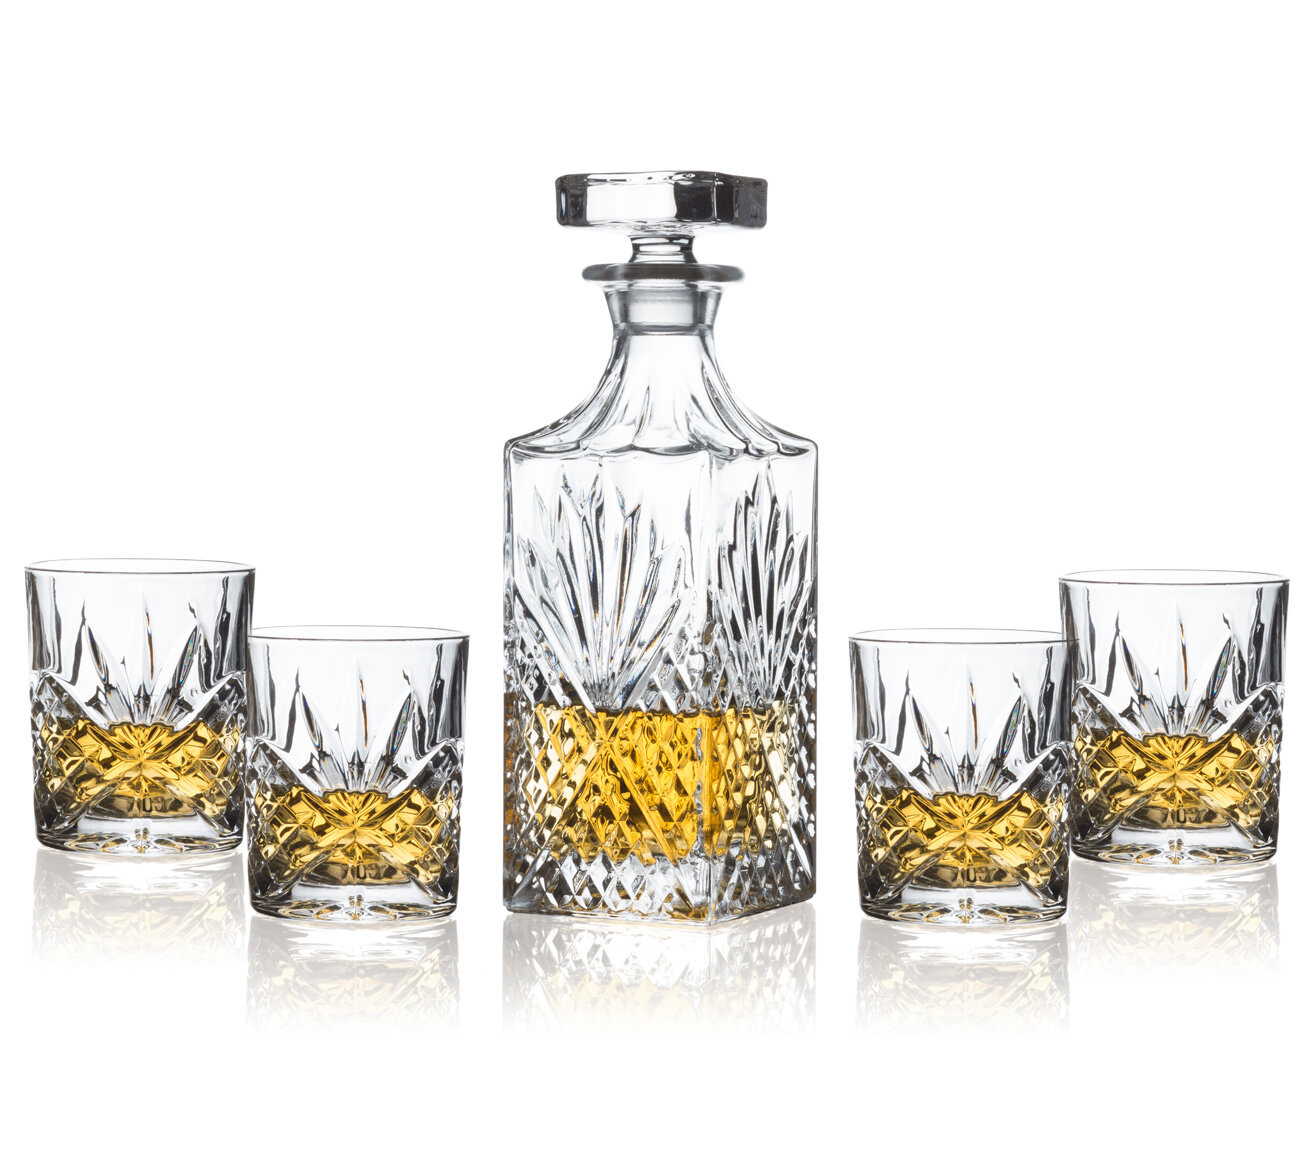 Five Piece Whiskey Decanter and Glasses Set